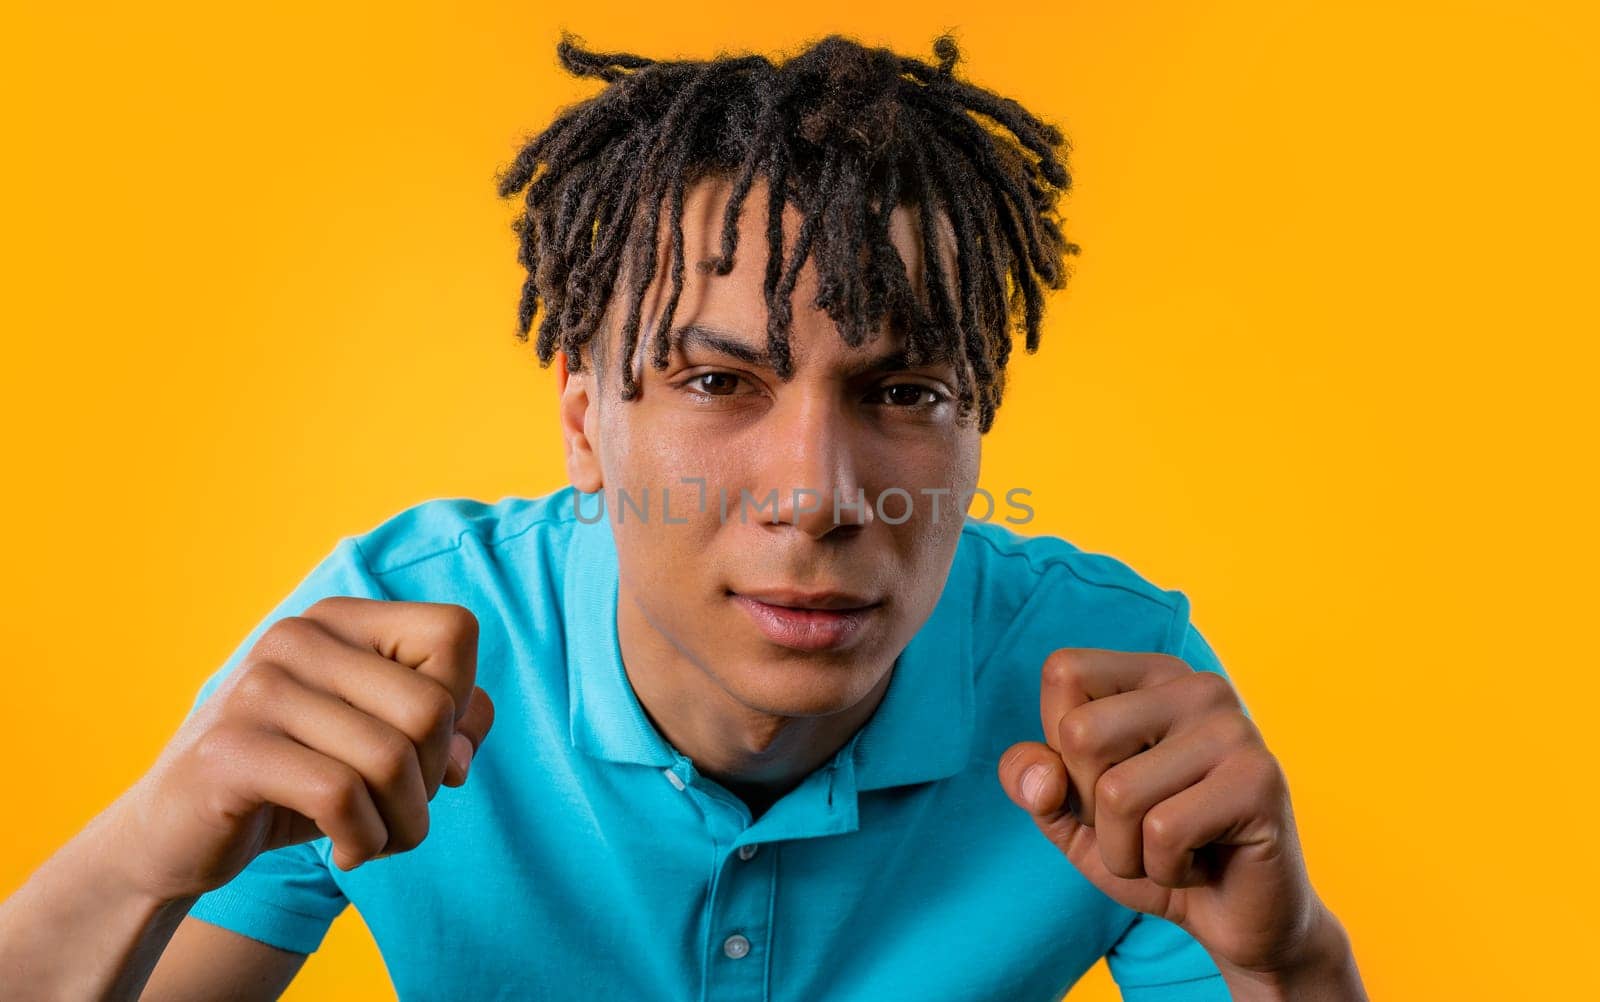 African man cannot believe eyes, squinting because cant see anything, yellow background. Poor eyesight, vision problems. Young guy with long dreadlocks hairstyle.